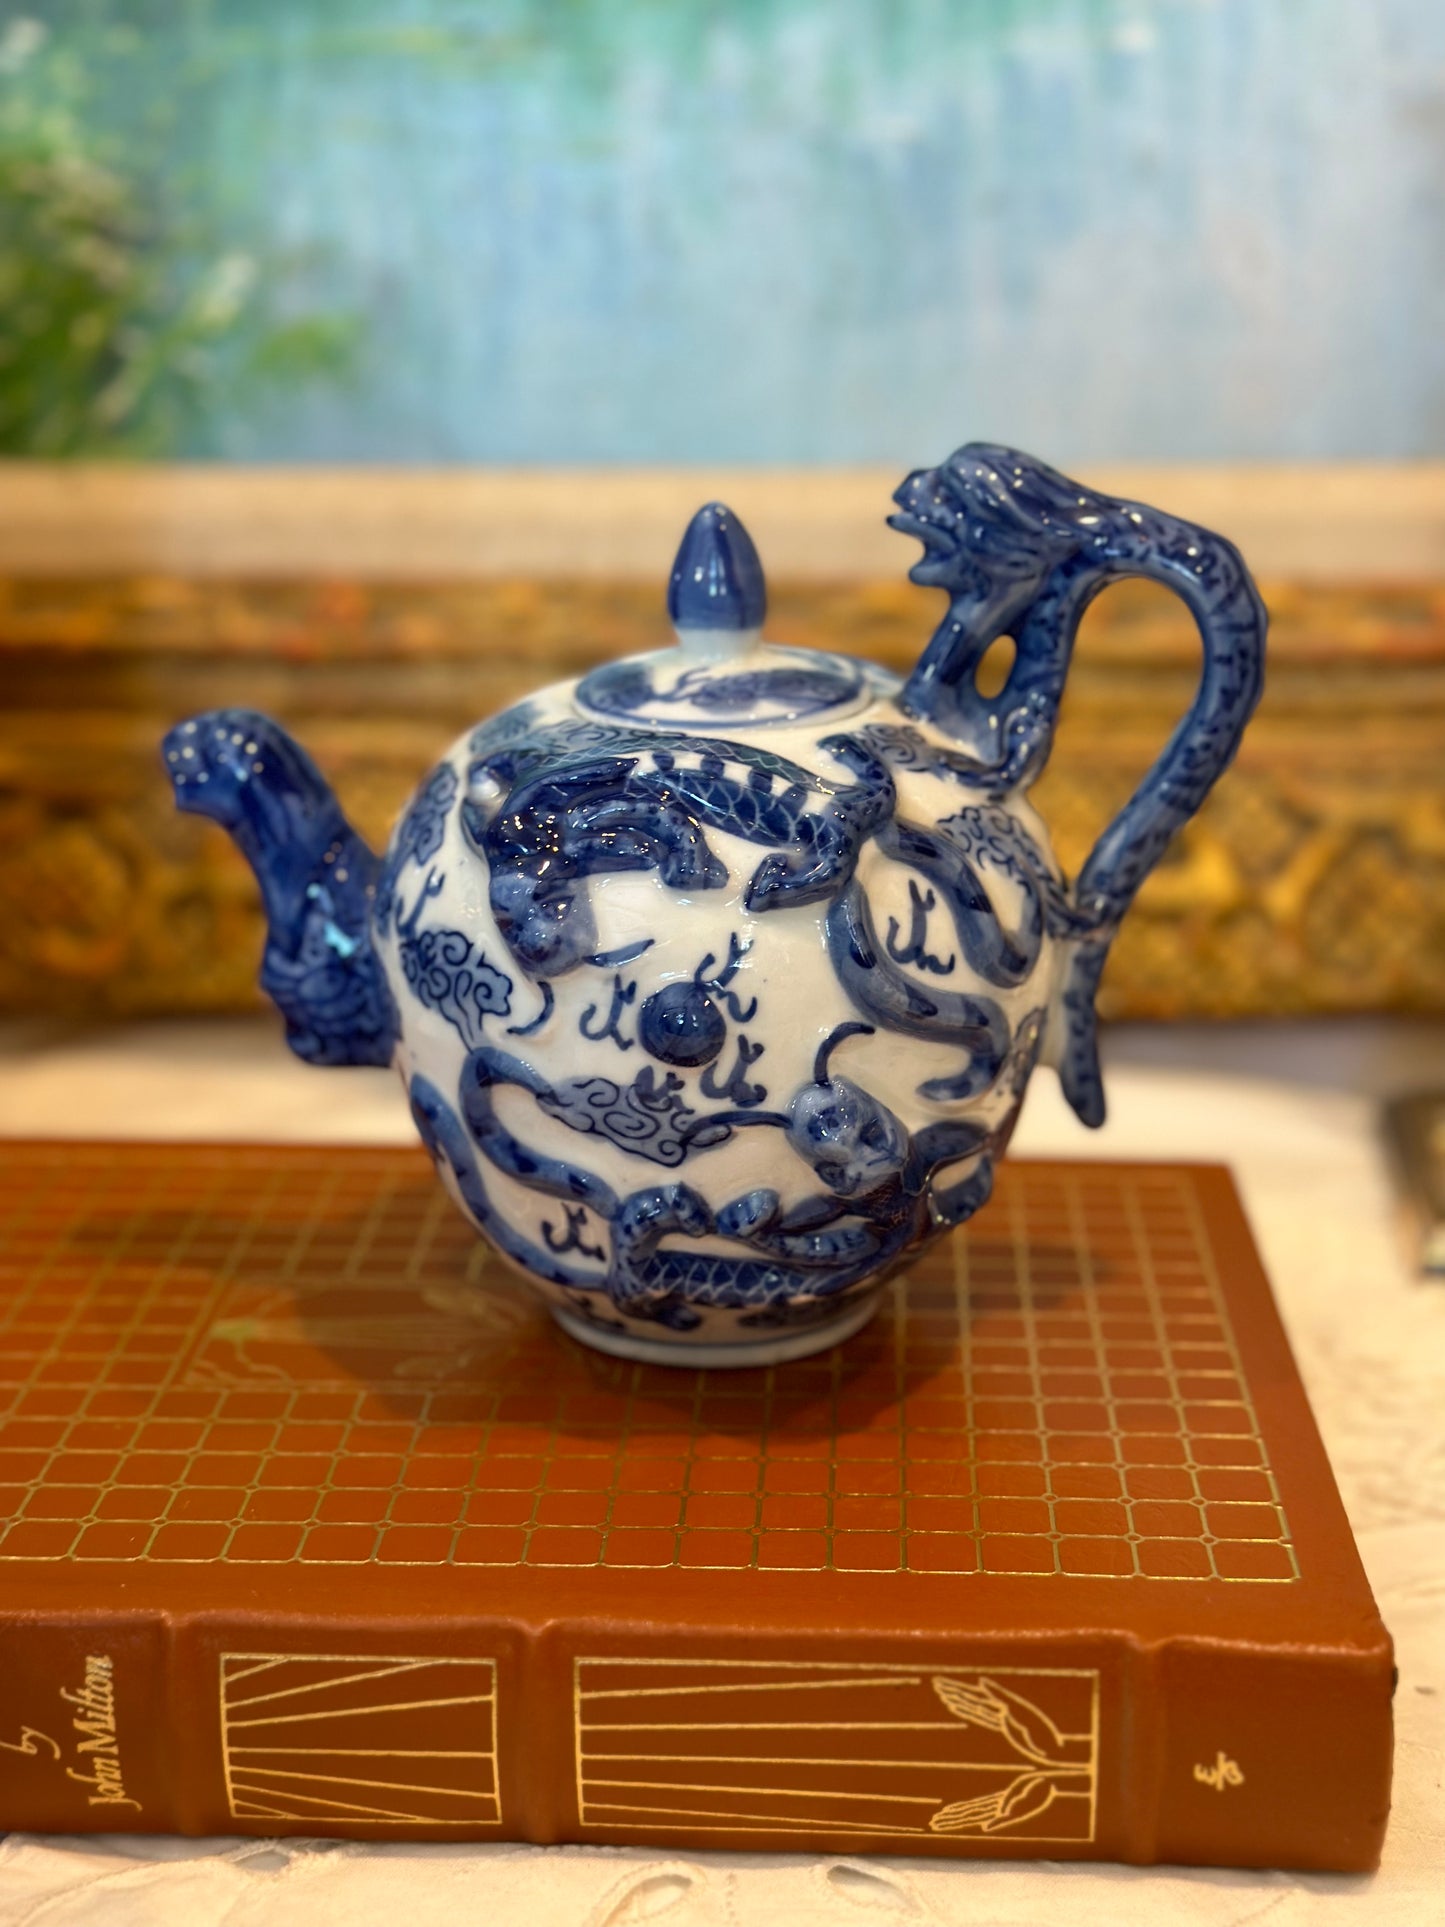 Stunning pair of blue and white dragon-shaped teapots - Pristine!